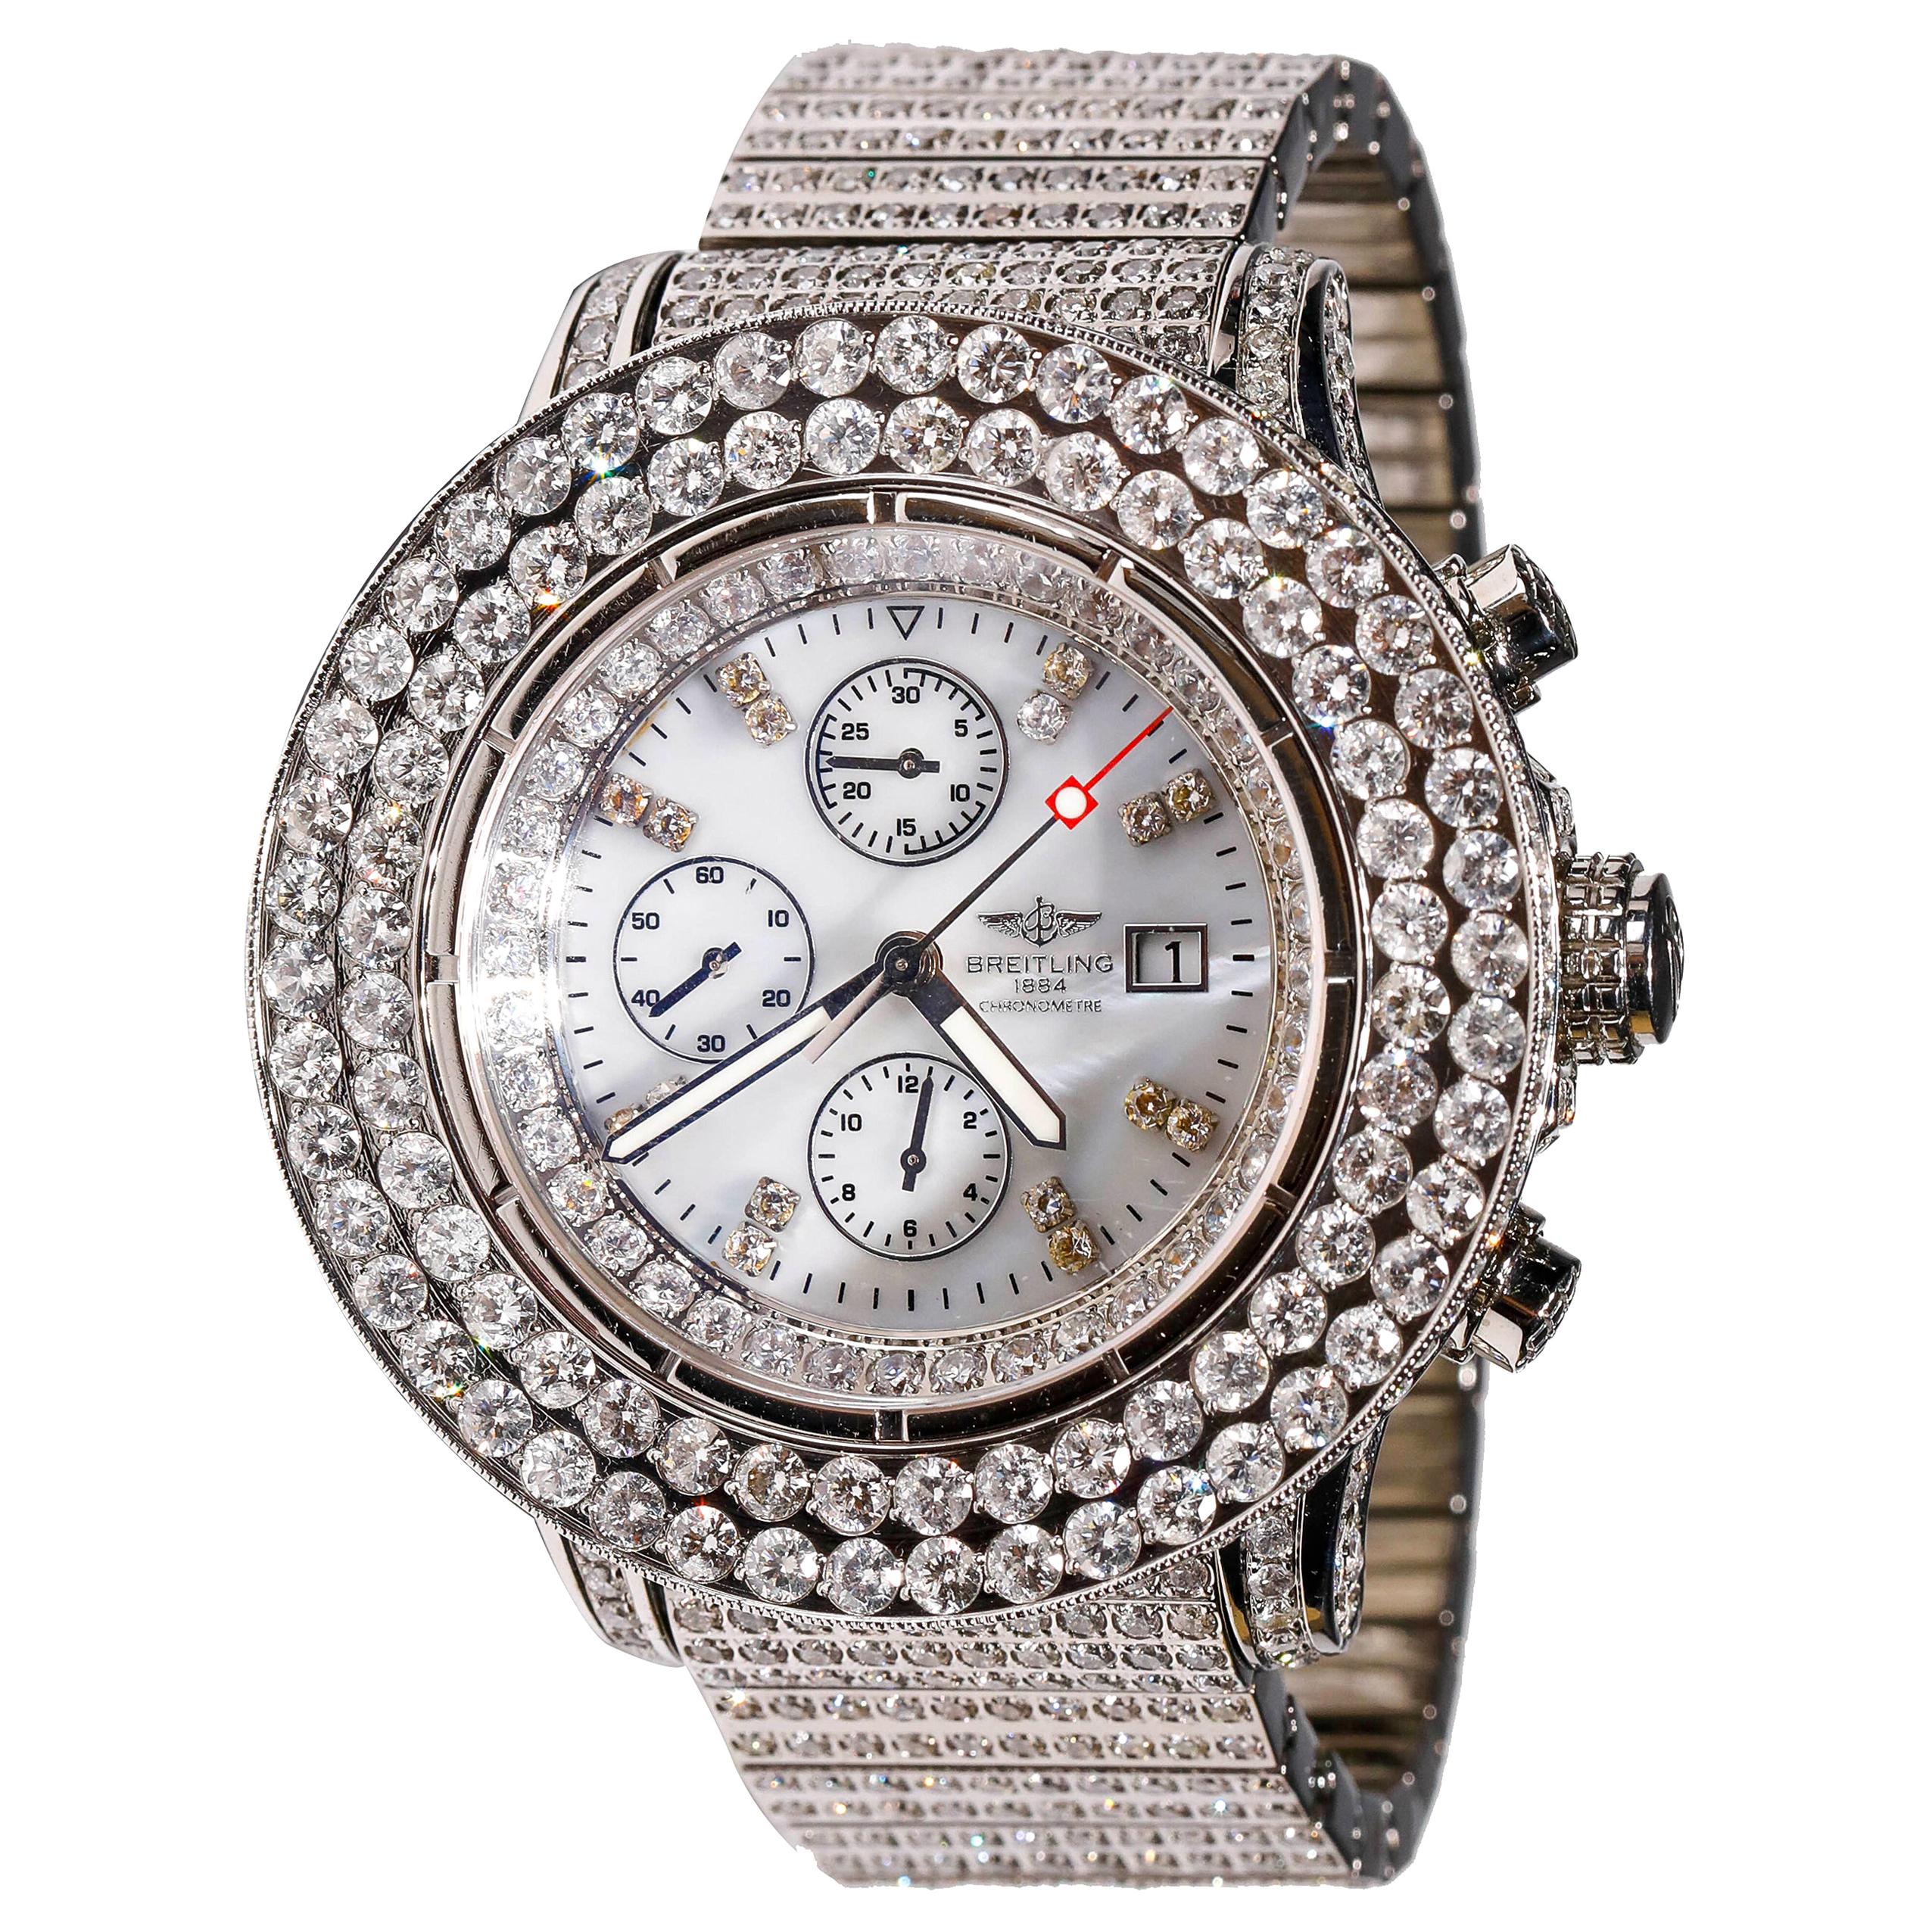 Stainless Steel Custom 33 Ct Diamond Breitling Chronometer Automatic Dial Watch